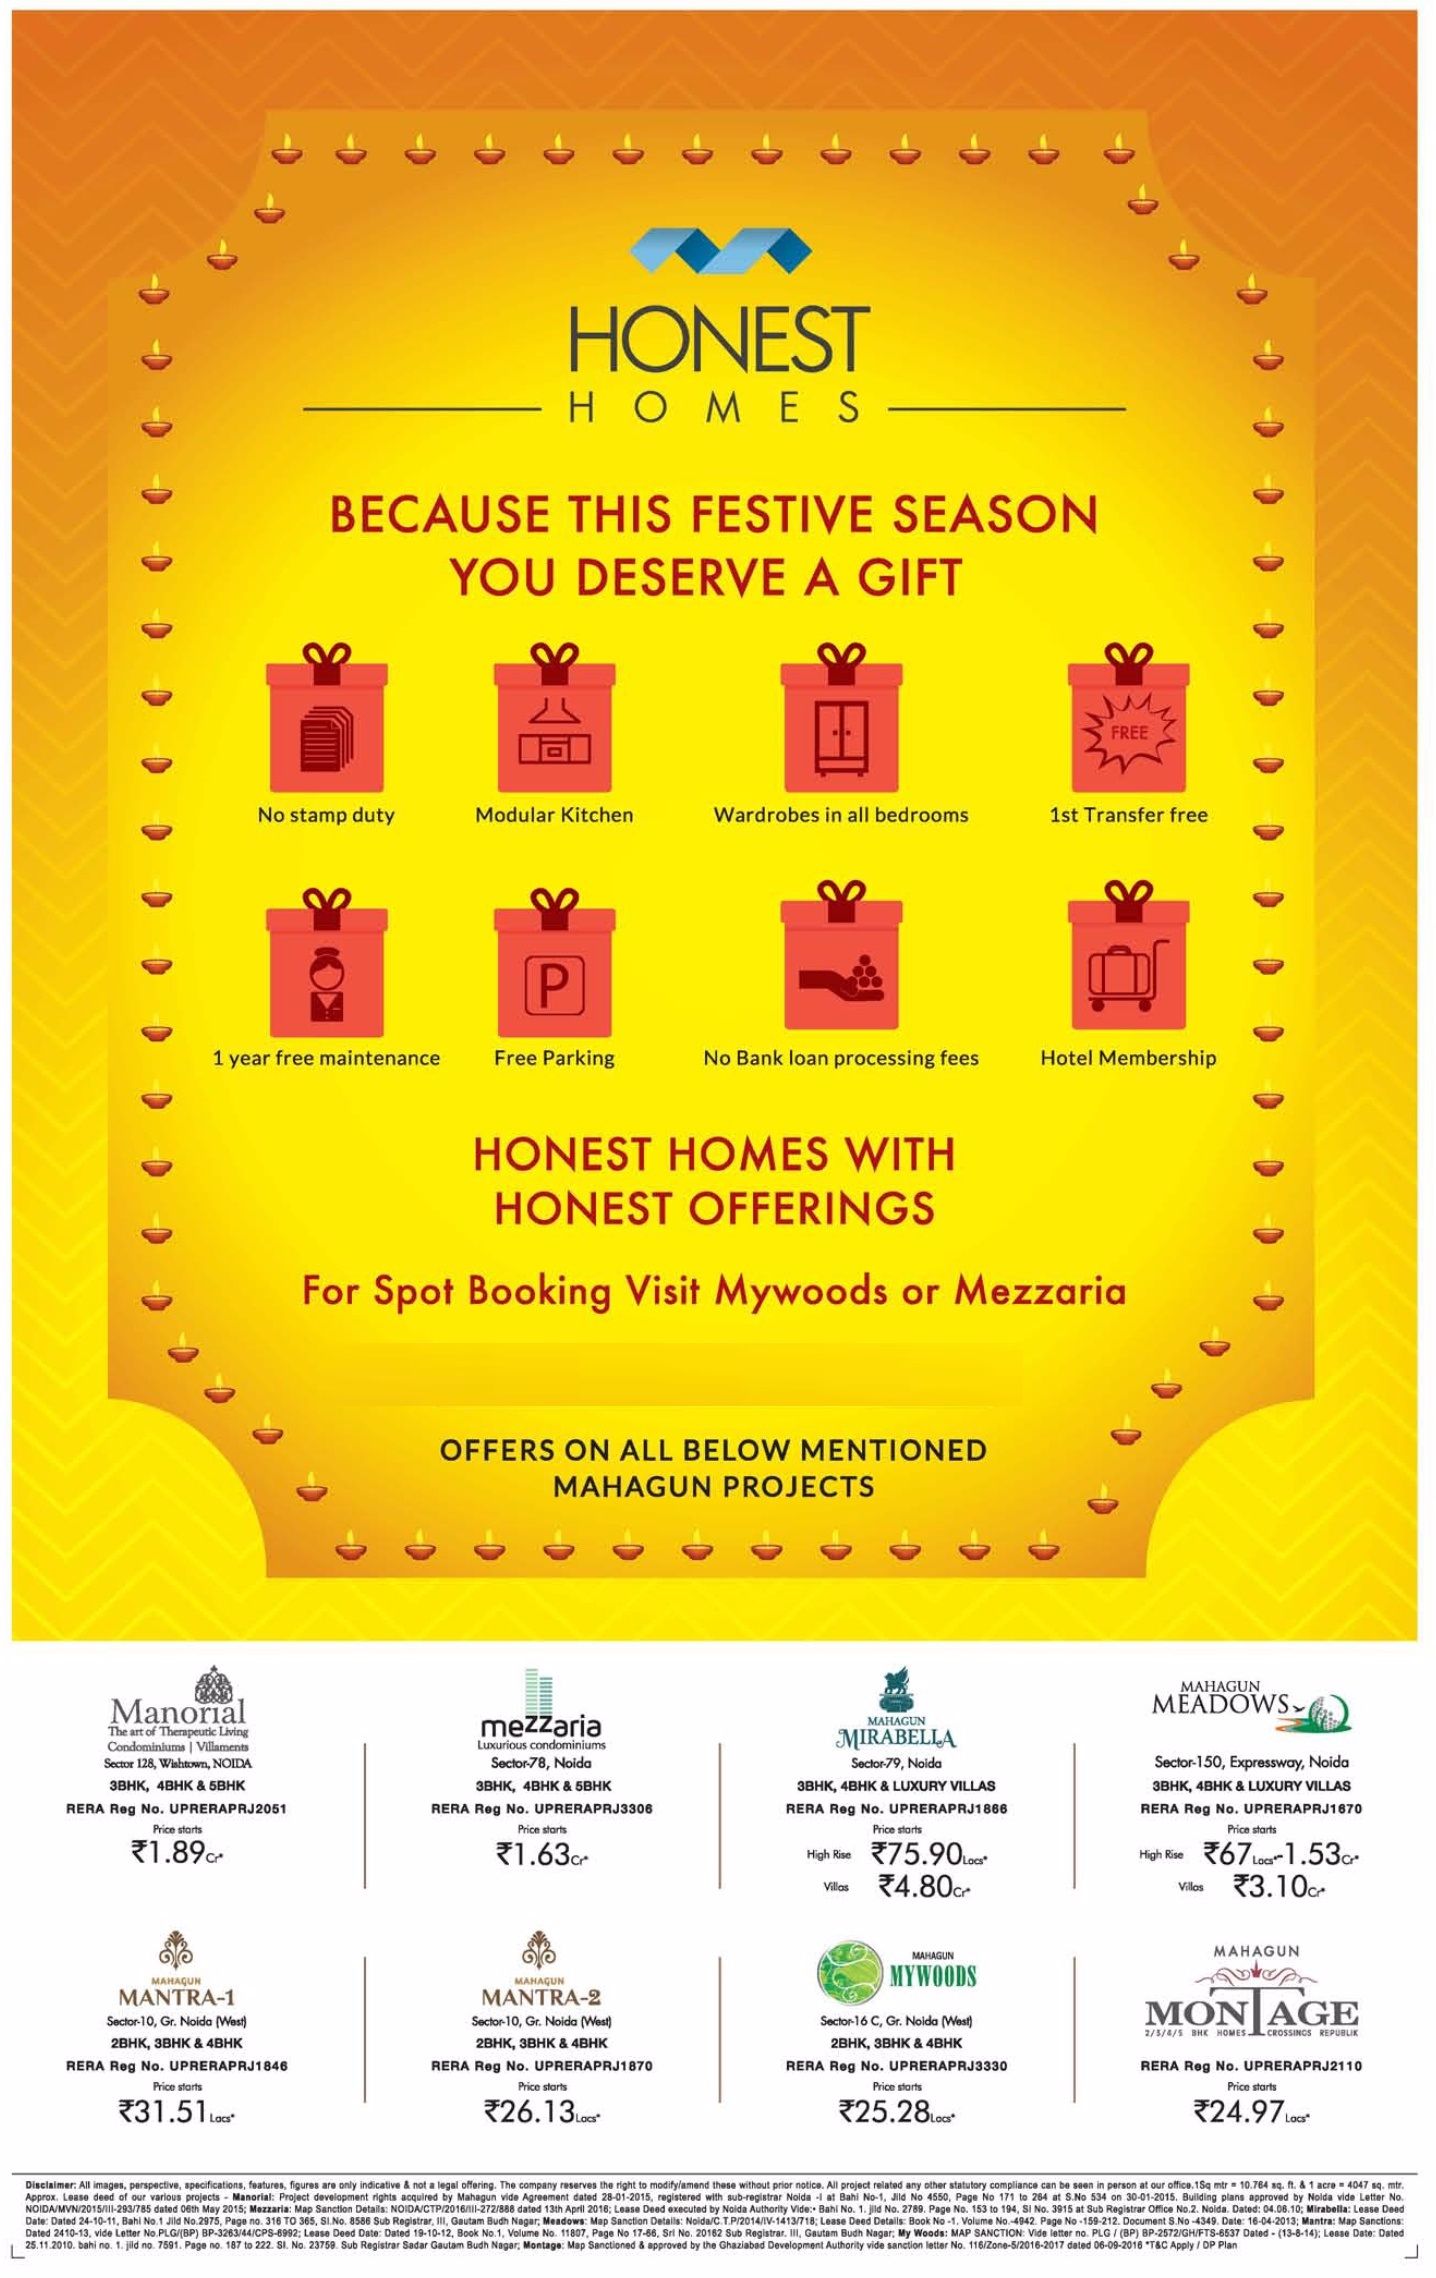 This festive season book honest homes with honest offerings at Mahagun Projects